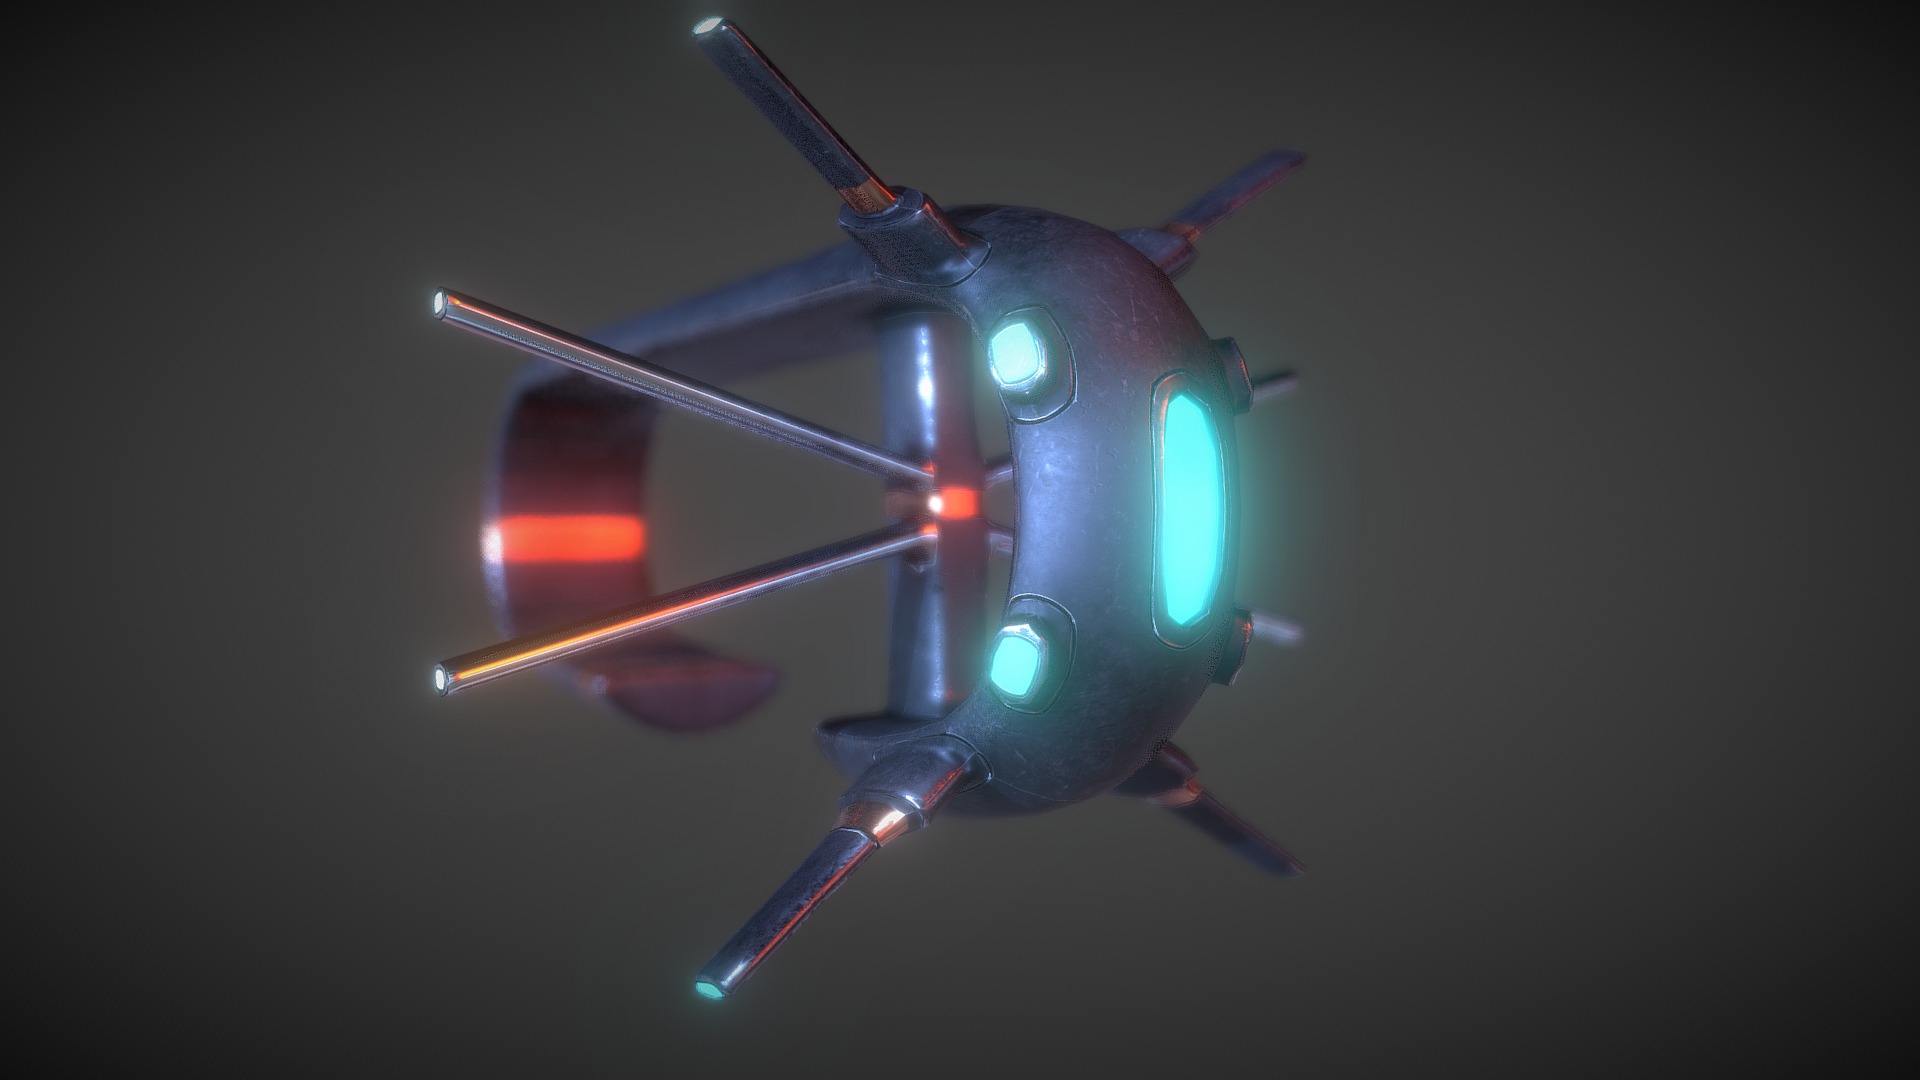 3D model Dron Concept - This is a 3D model of the Dron Concept. The 3D model is about a drone with a light on it.